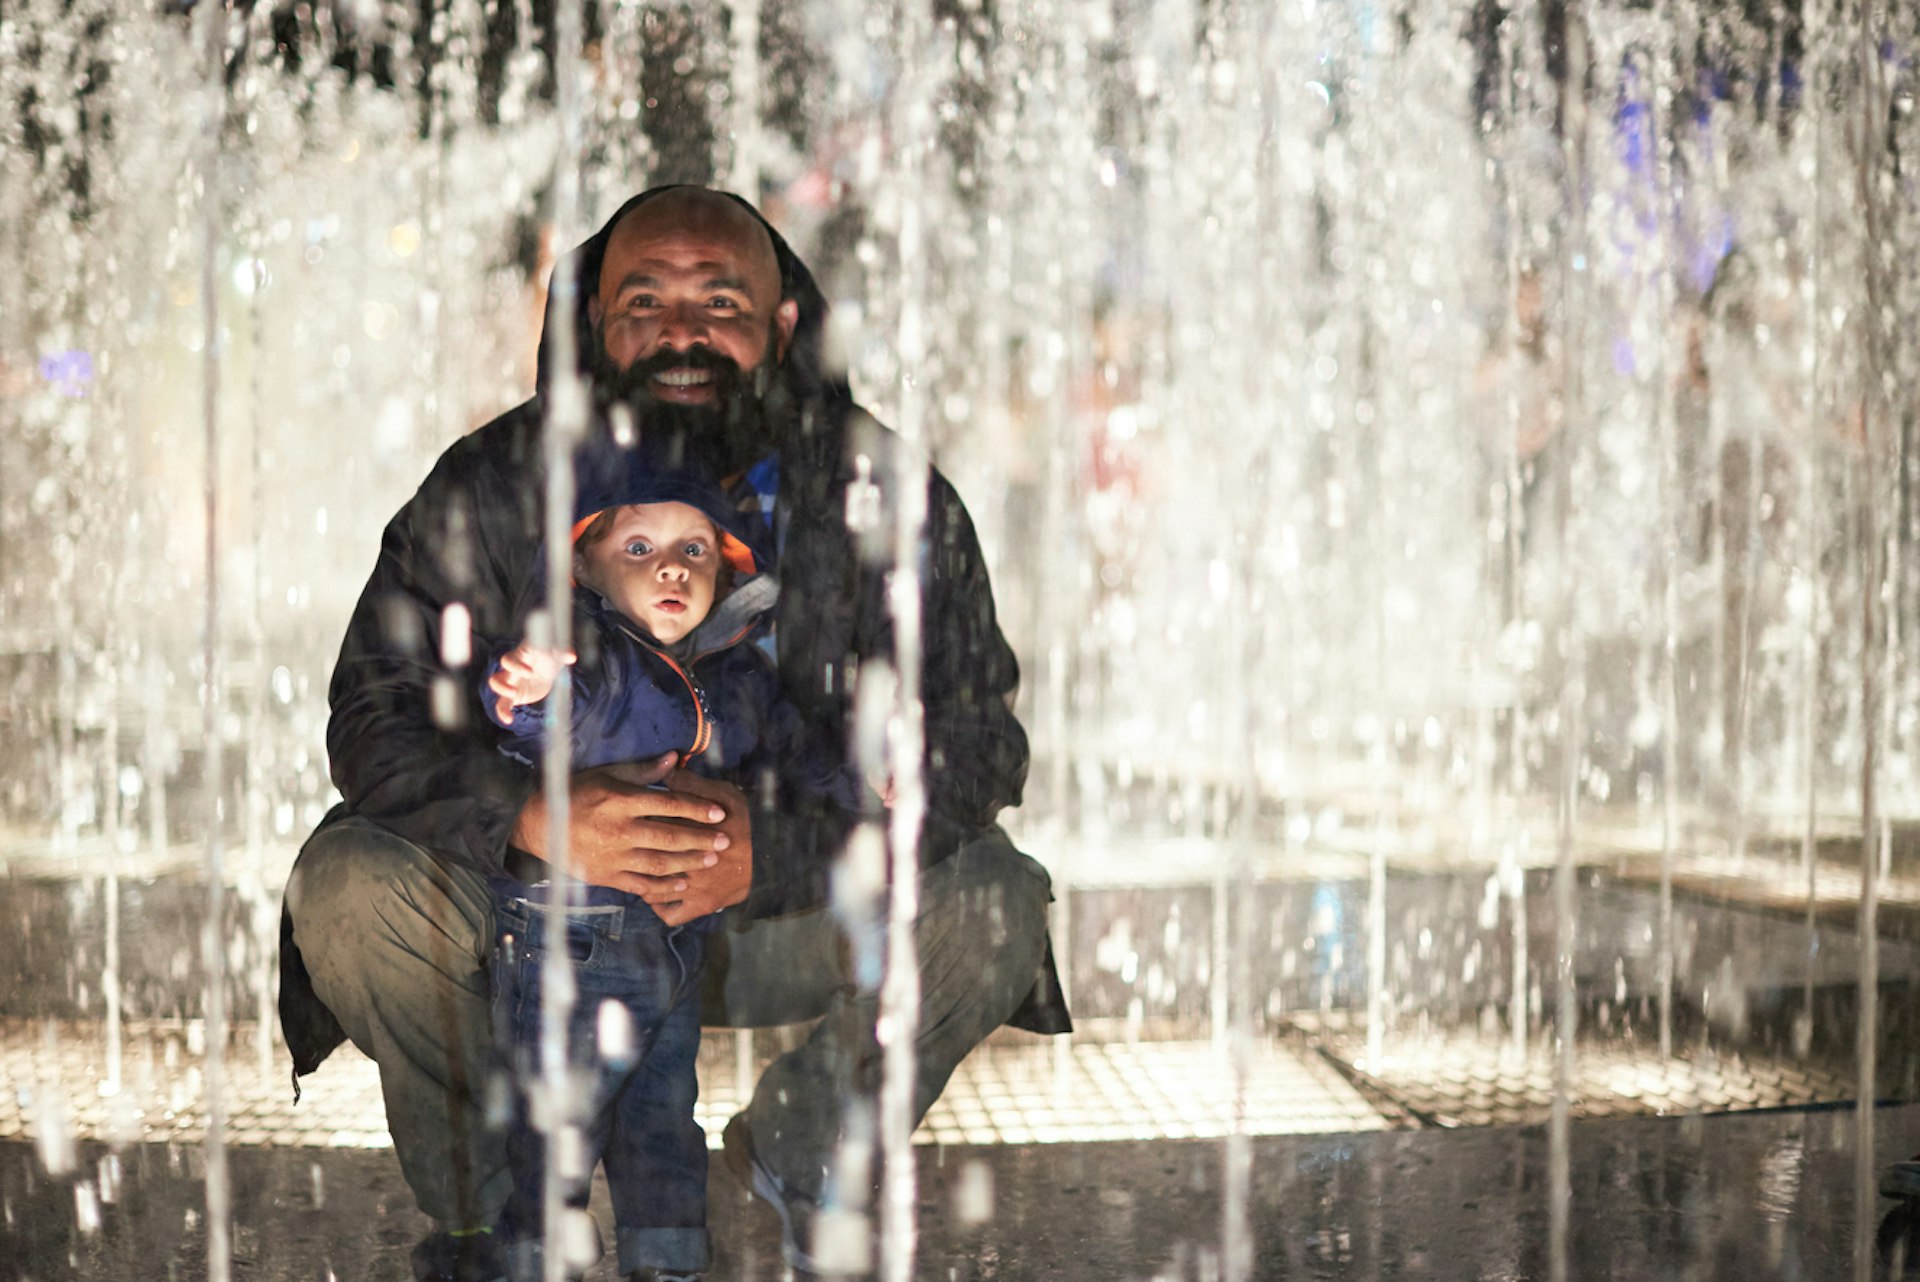 A father sits with a toddler in among the jets of a fountain. The toddler is reaching out at the water.